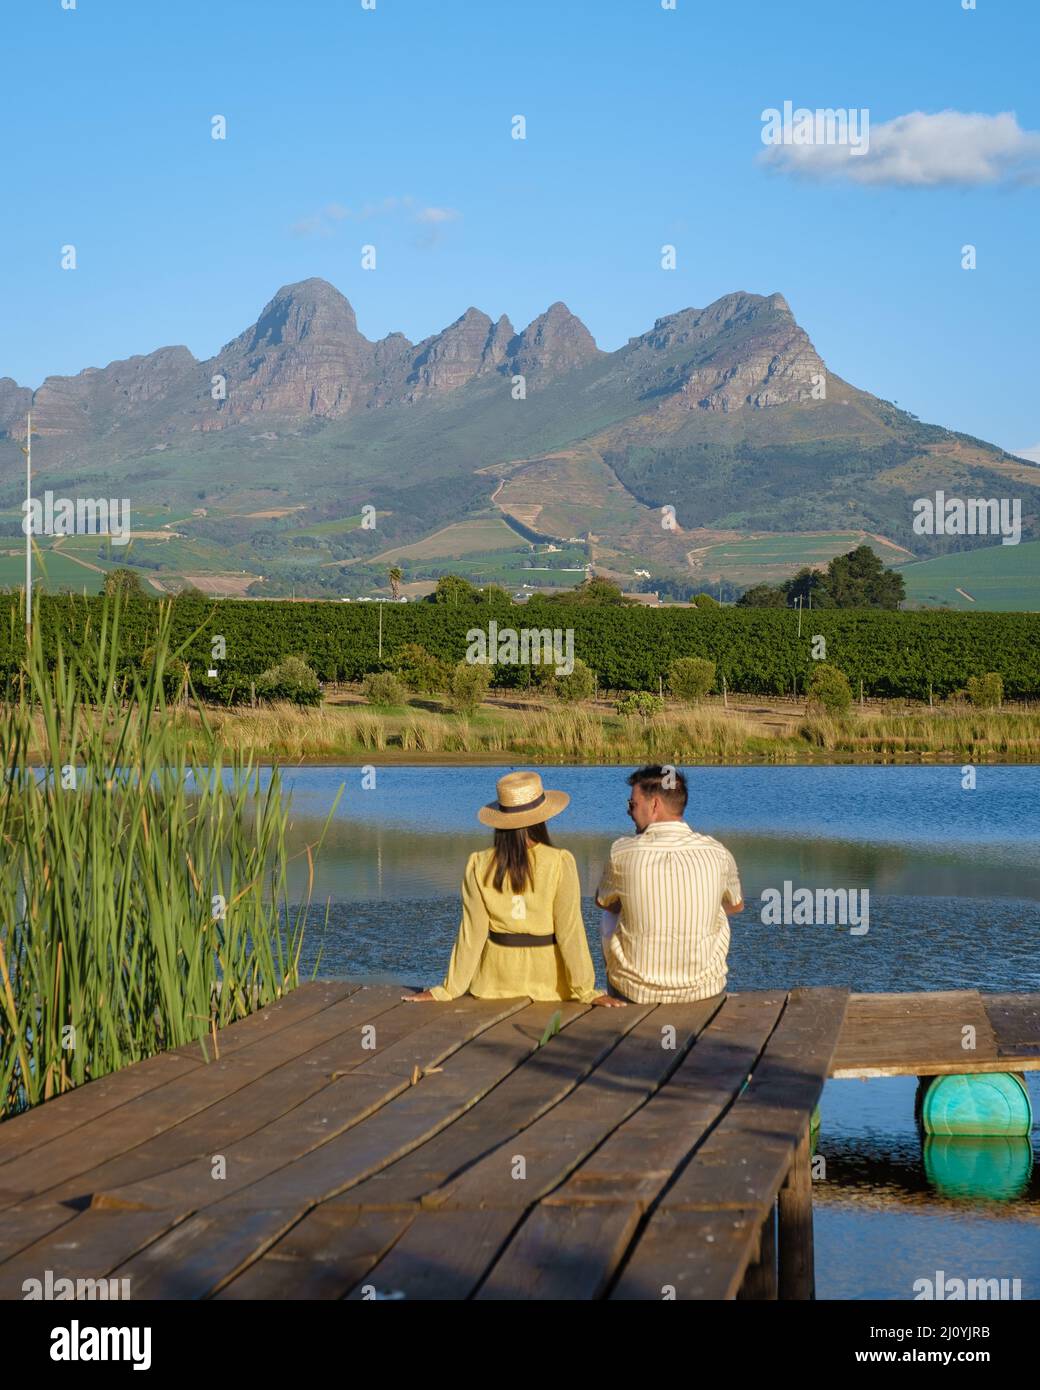 Couple man and woman looking out over lake,Vineyard landscape at sunset with mountains in Stellenbosch, near Cape Town, South Af Stock Photo